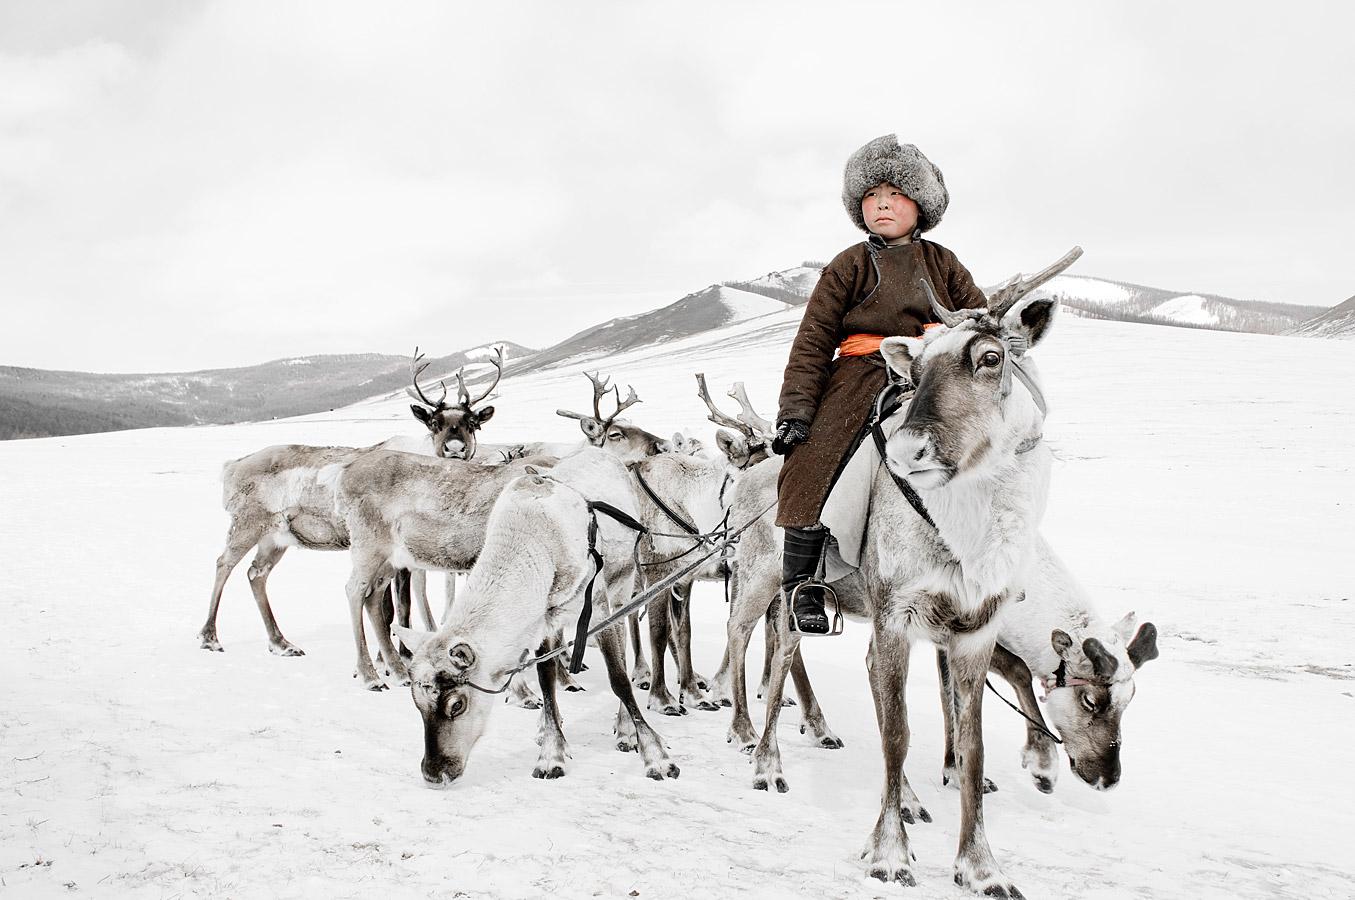 "XX 204 - Bayau Bulang - Renchinkhumbe, Khovsgol - Mongolia, 2011


Tsaatan (Mongolian for ""those who have reindeer"") descend from reindeer herders who have inhabited the remotest subarctic taiga for thousands of years, moving between five and ten